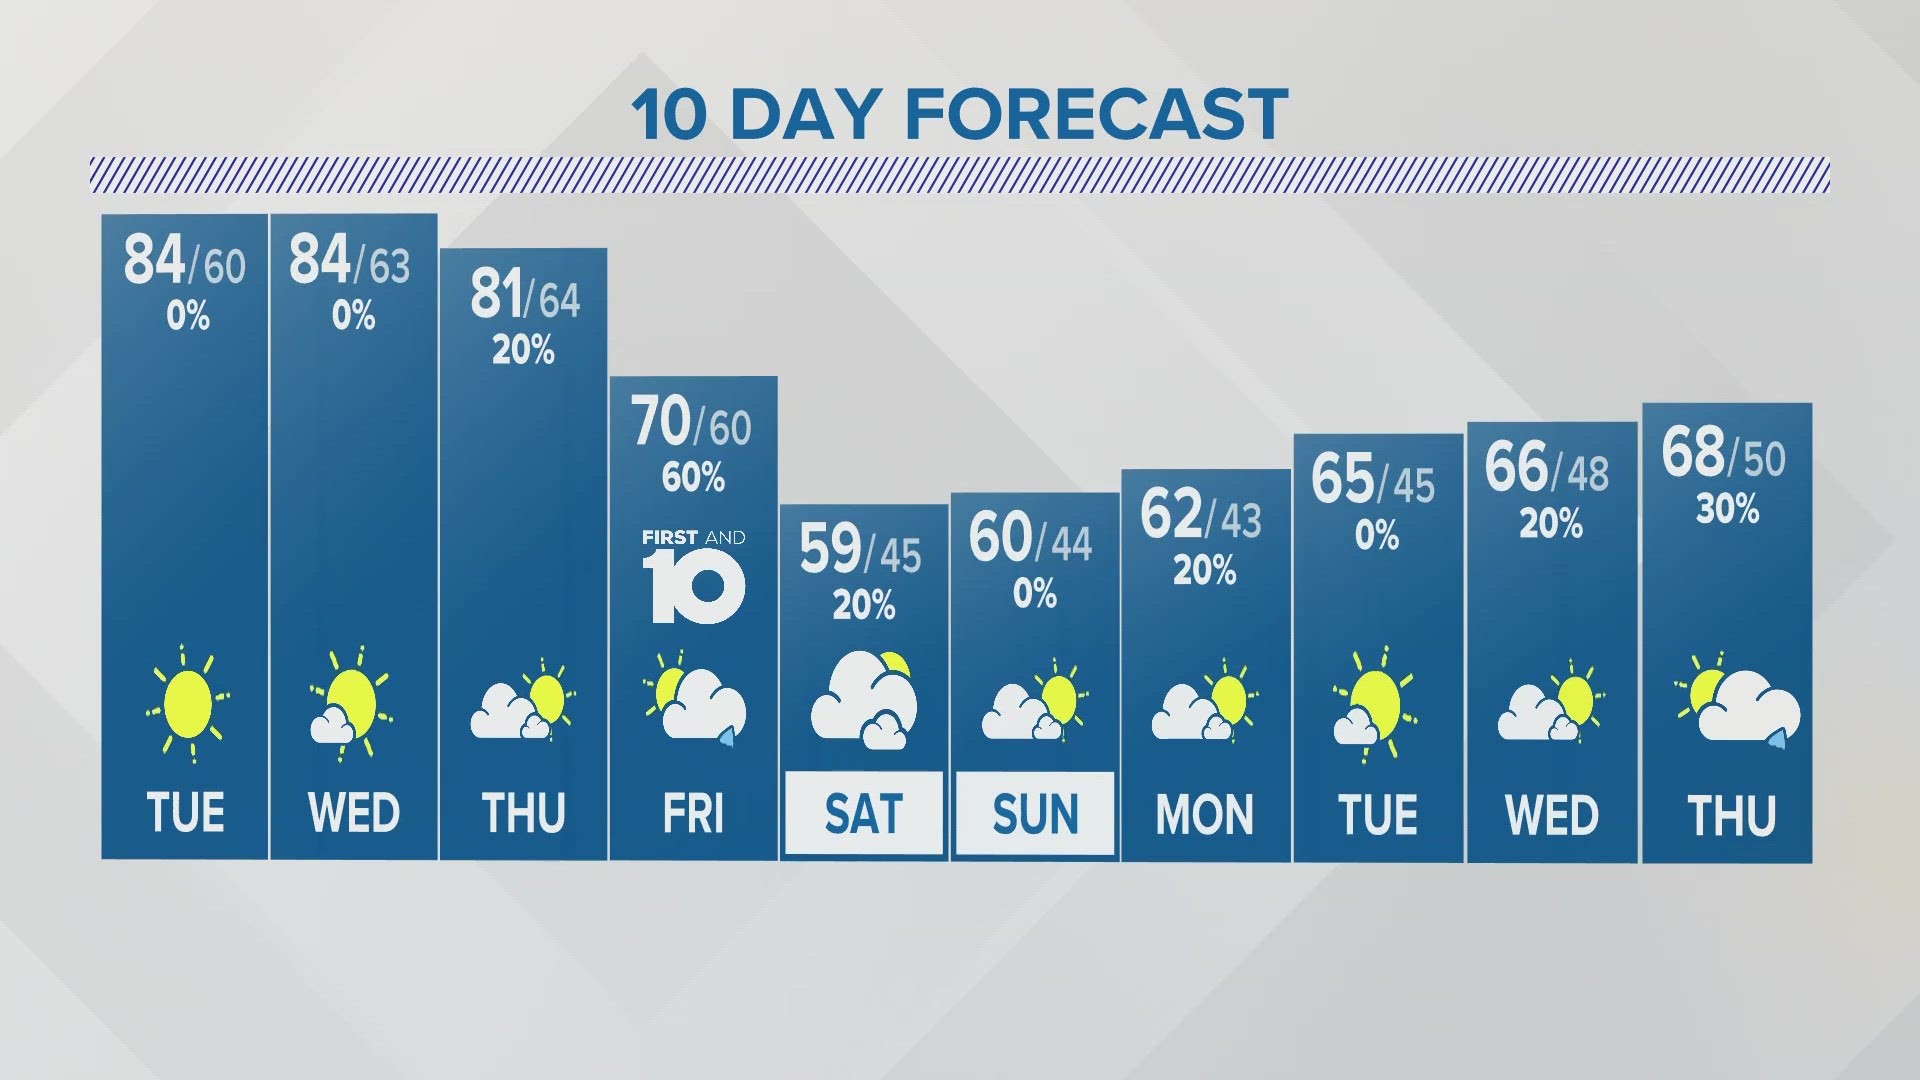 A mostly dry week, but rain could arrive on Friday.